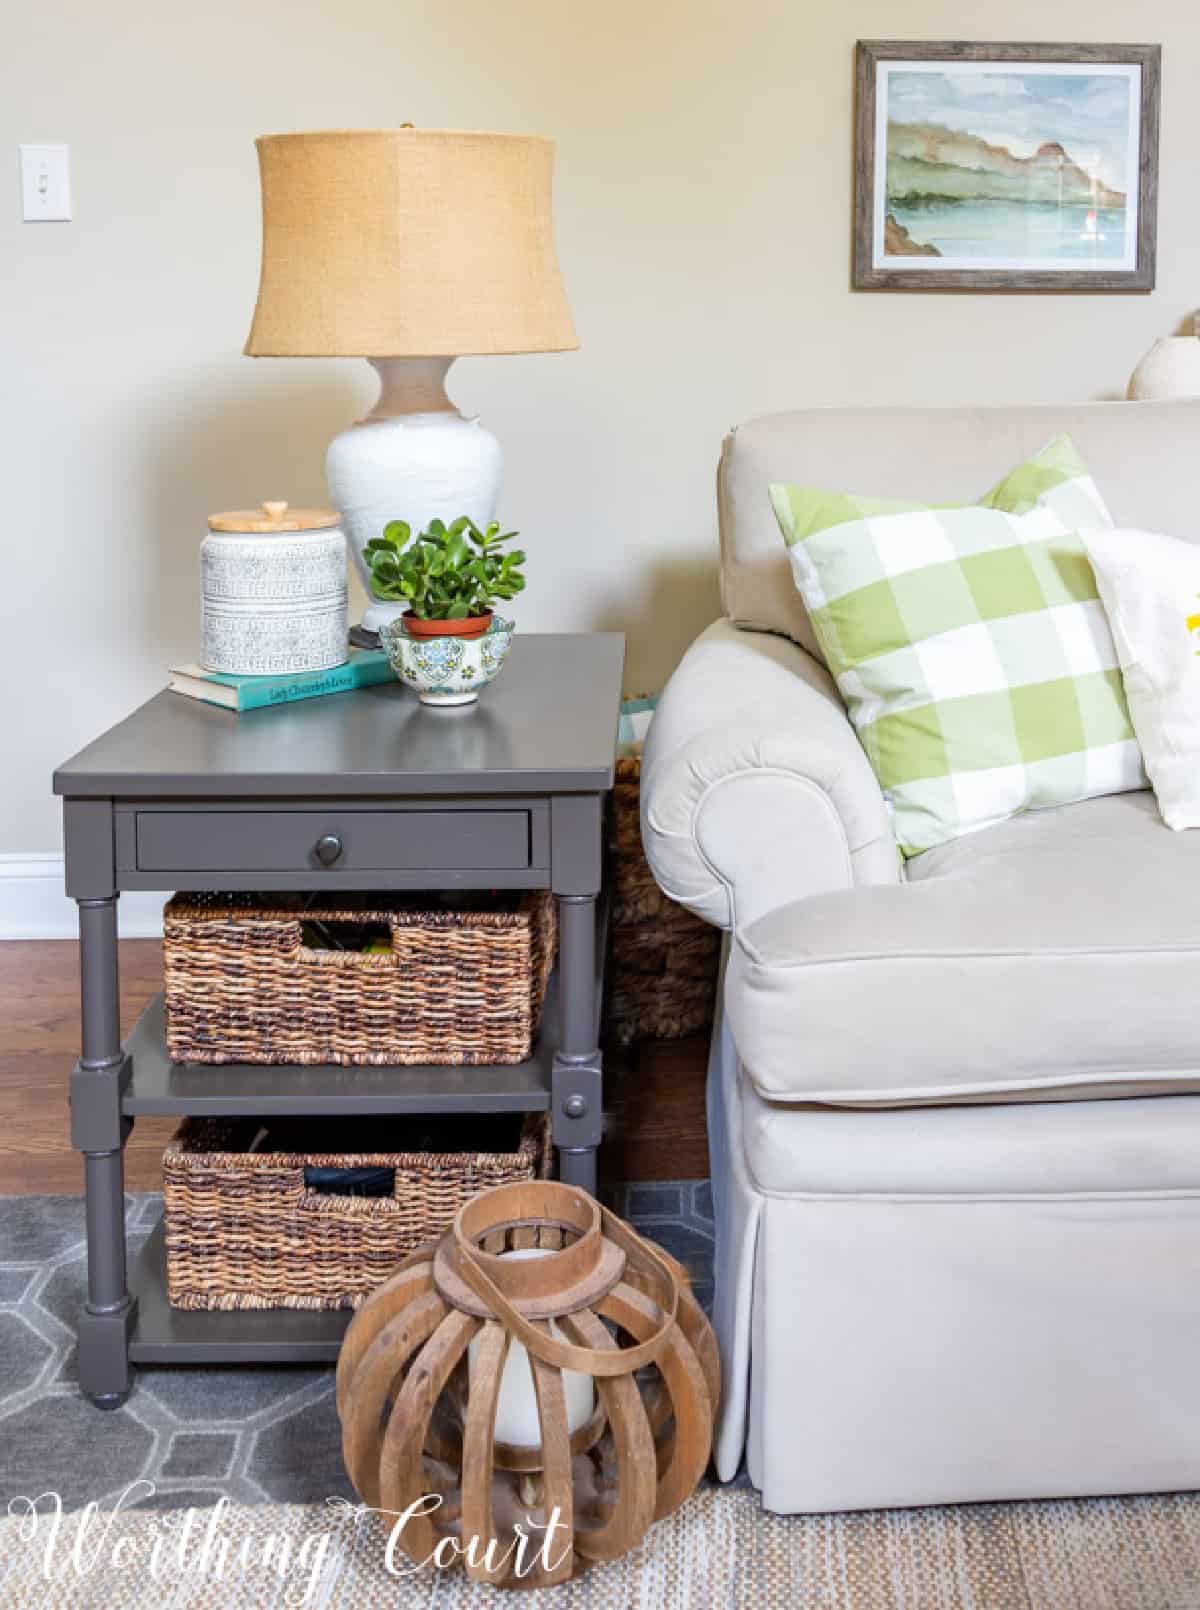 gray end table with baskets on shelves that give off a coastal style vibe